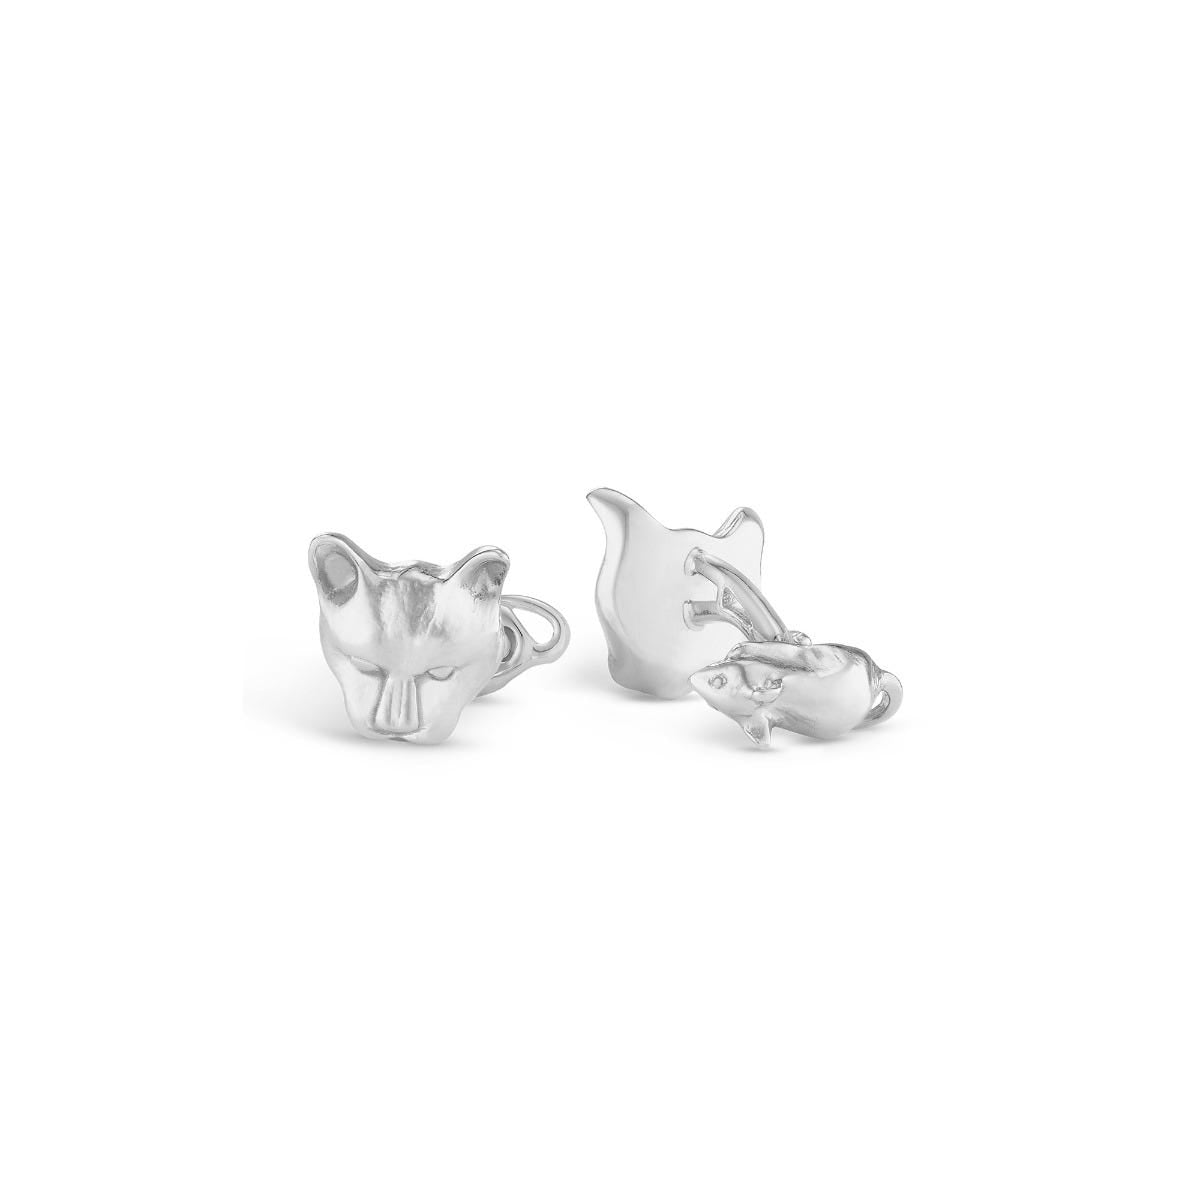 Cat & Mouse Cufflinks in Sterling Silver